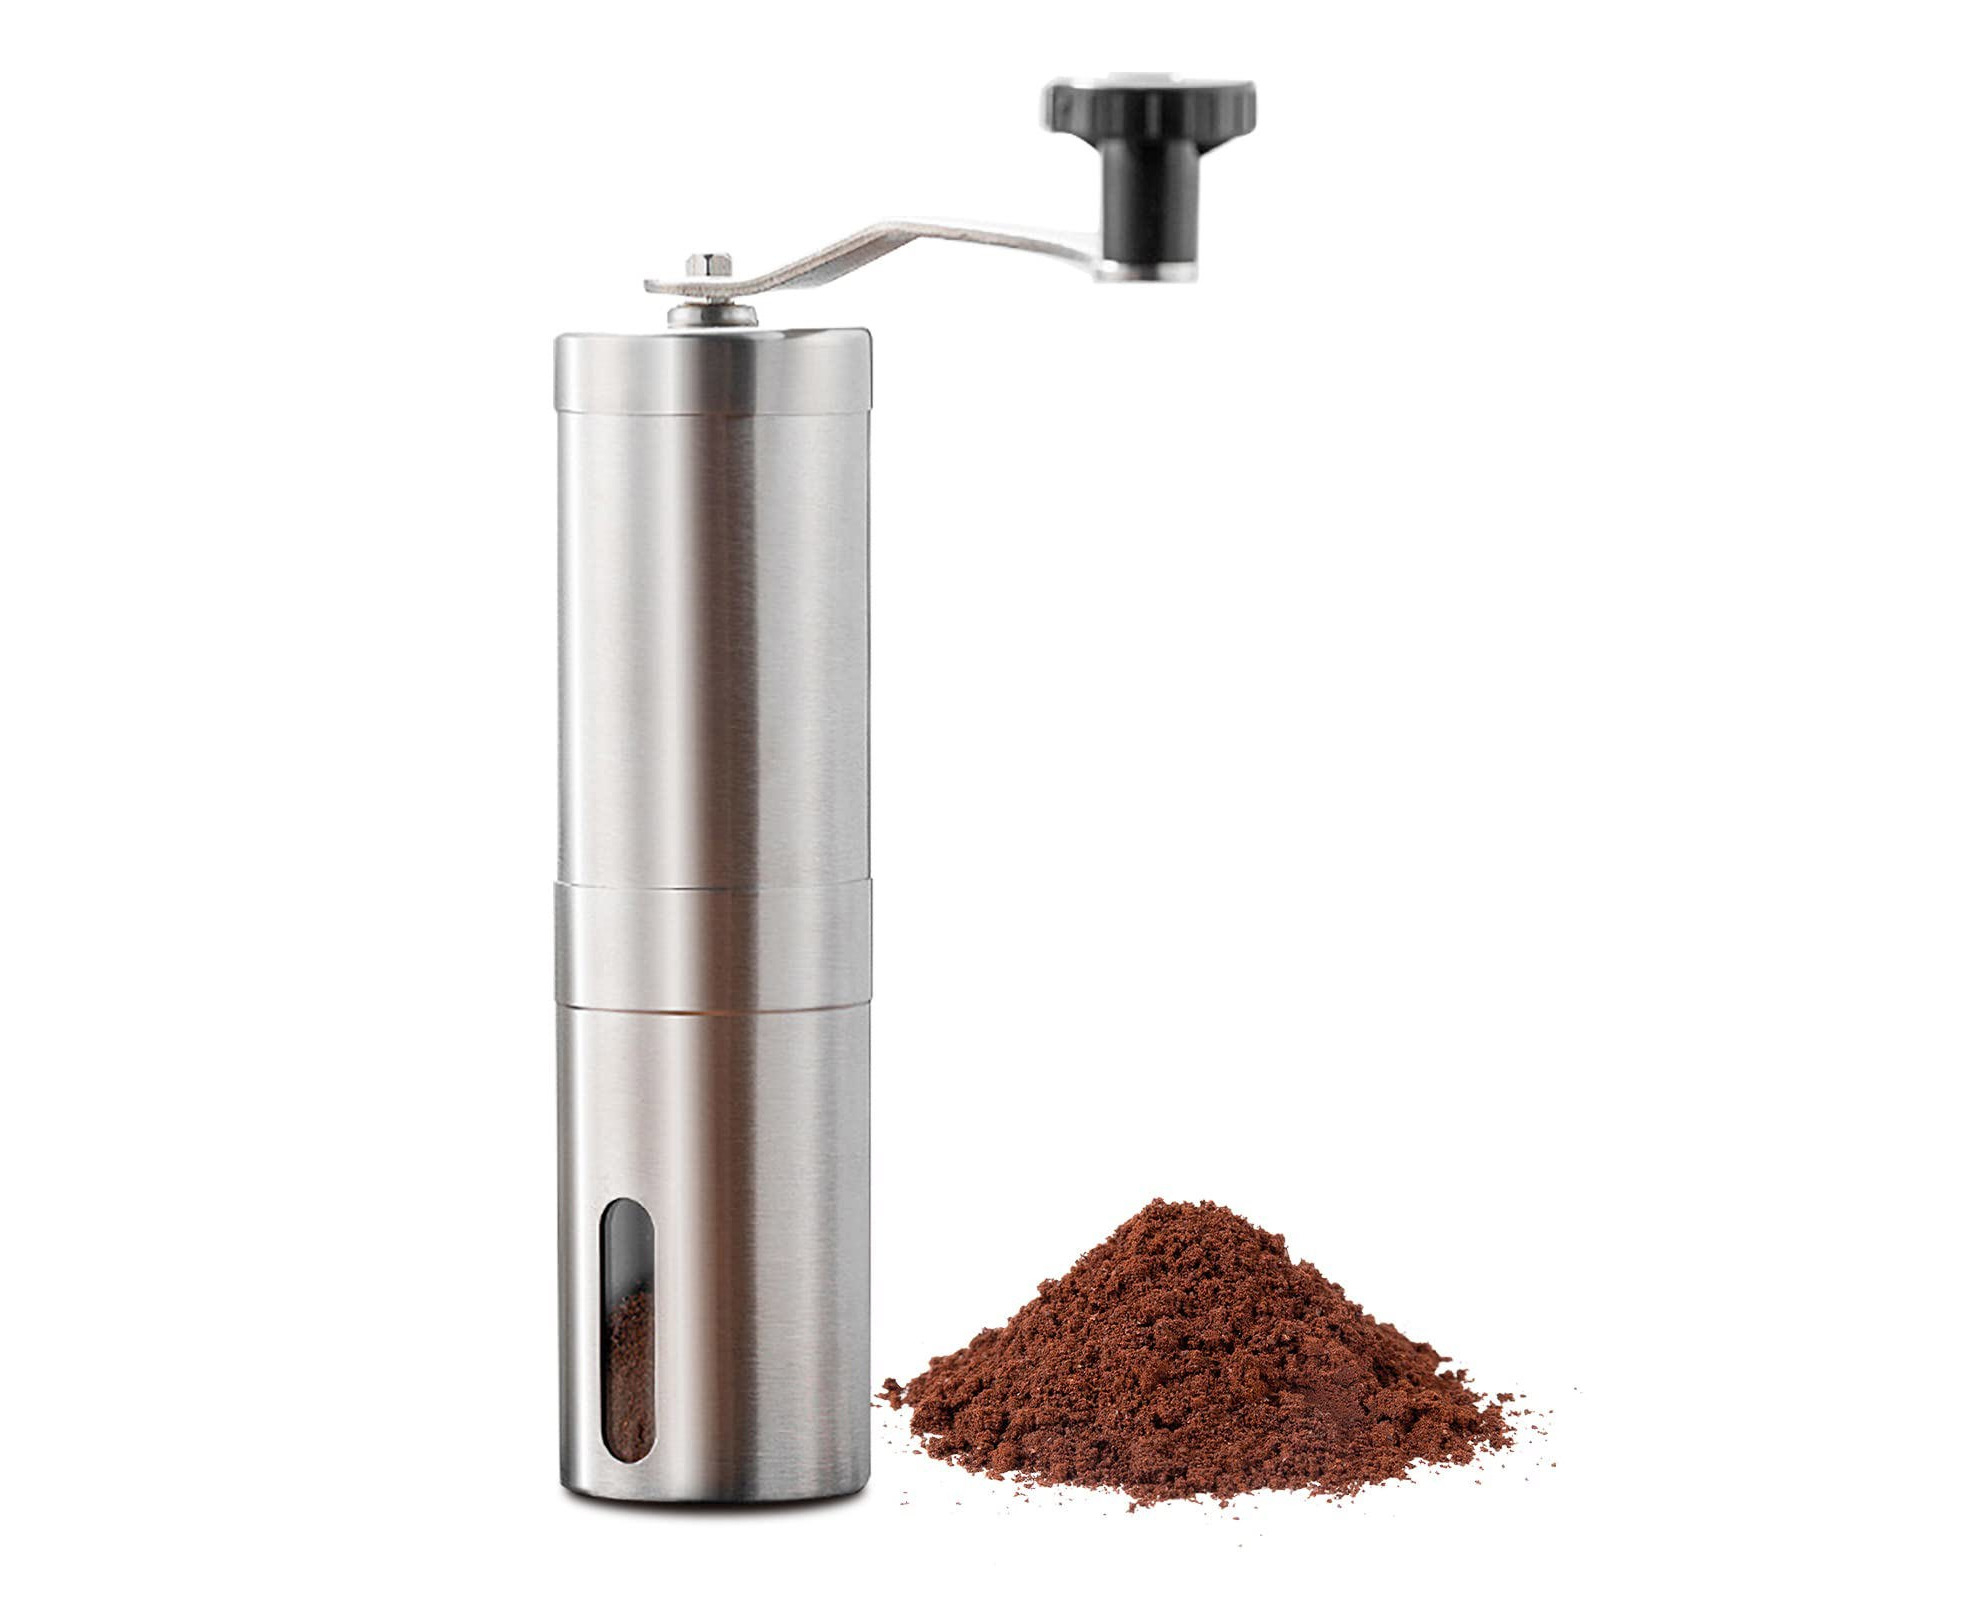 Manual Coffee Grinder with Adjustable Setting Stainless Steel Manual Coffee Grinder Spice Nuts Grinding Mill Hand Tool for Home Office,Kitchen 